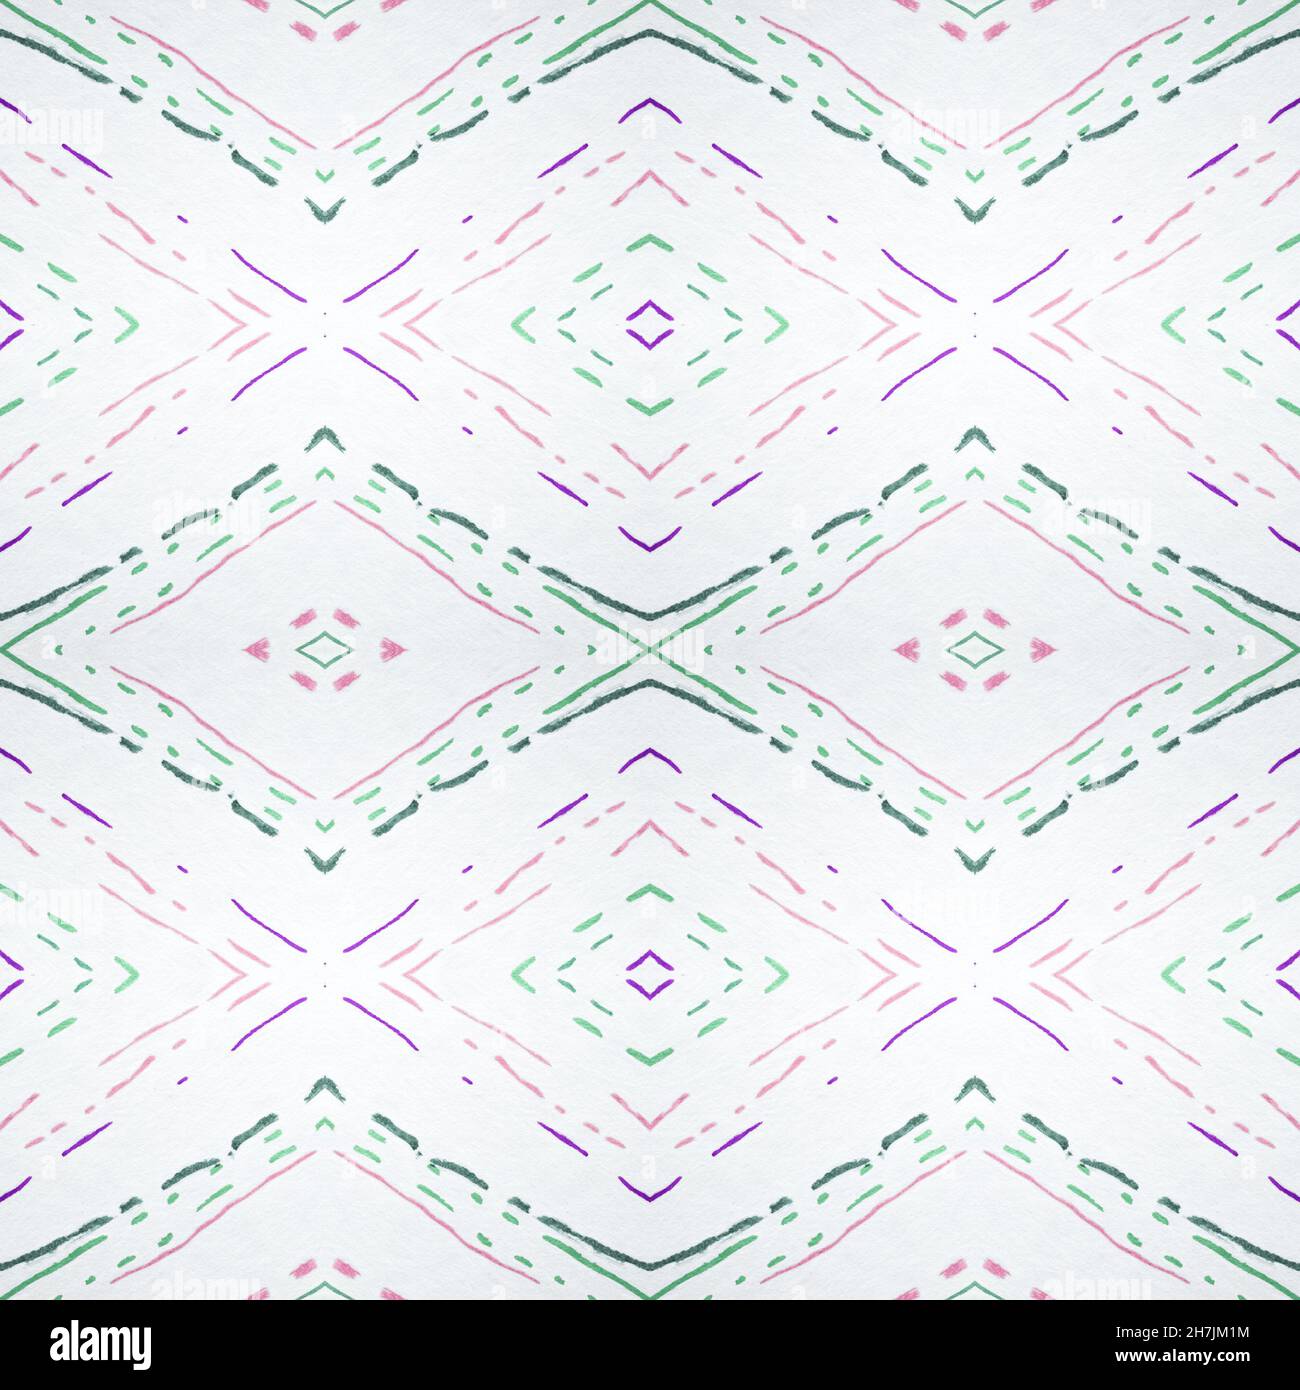 Painted Color Mexican Pattern. Seamless Geometric Stock Photo